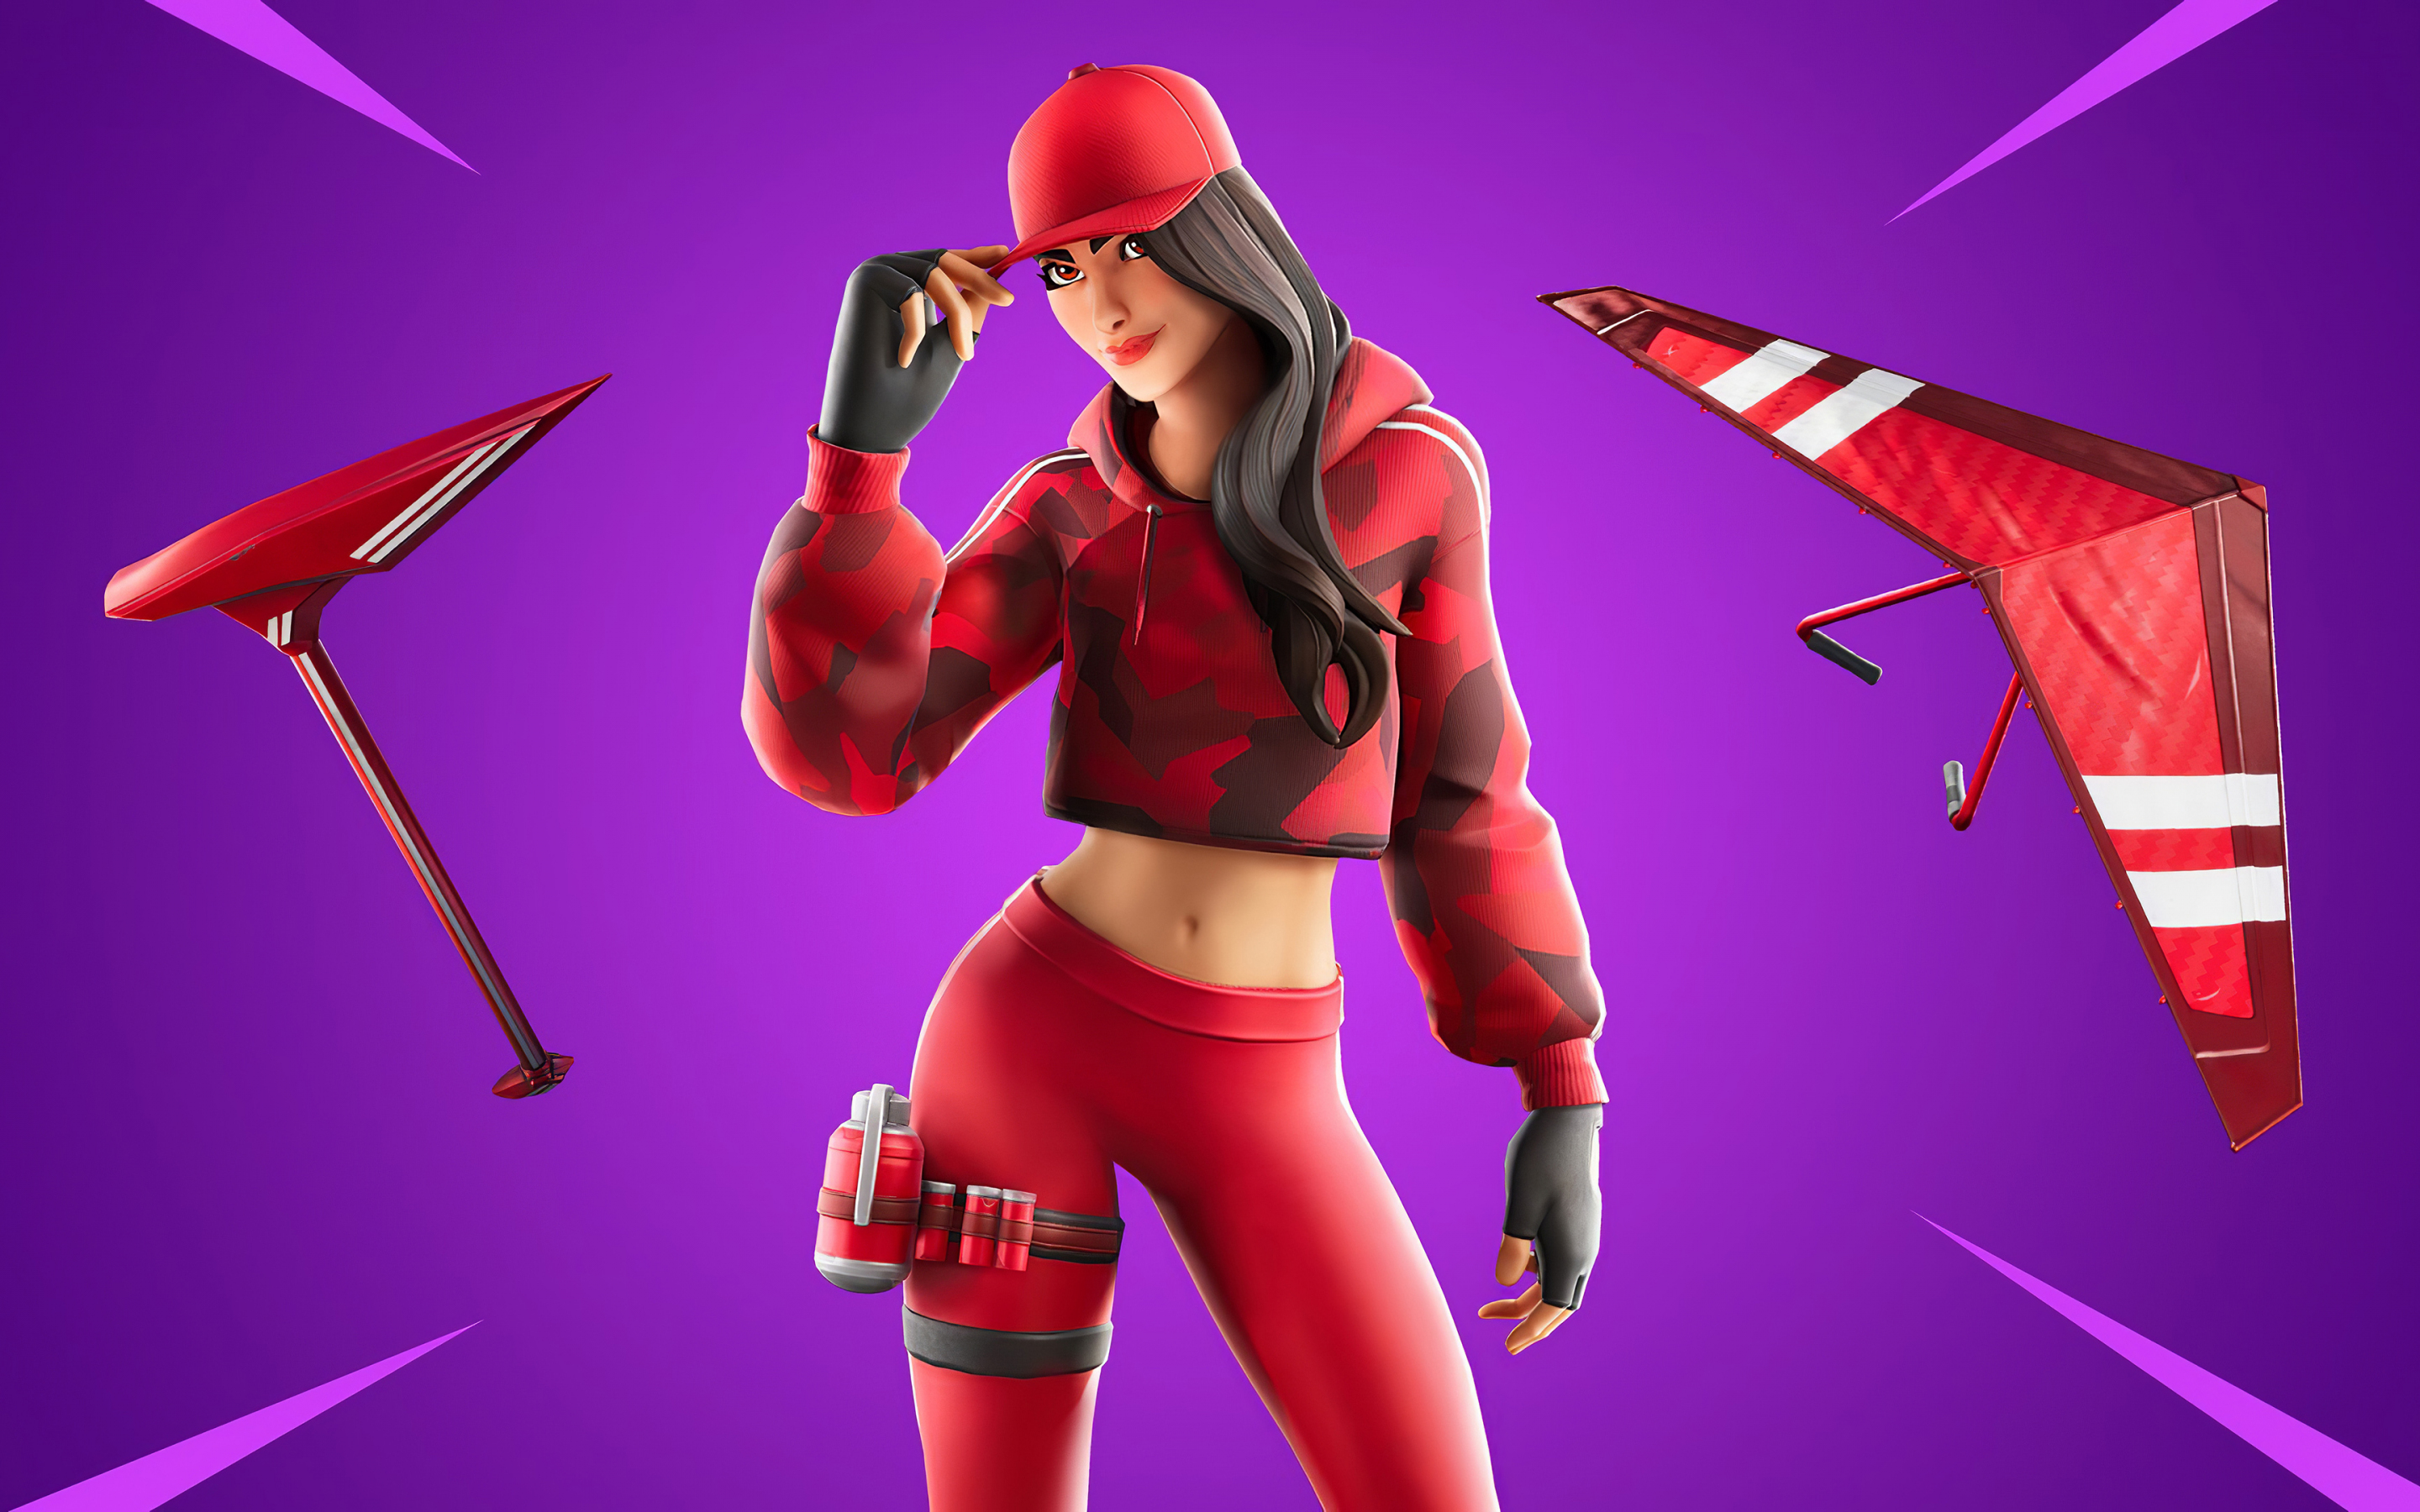 Fortnite chapter 2, Ruby red Outfit, 2019, 2880x1800 wallpaper